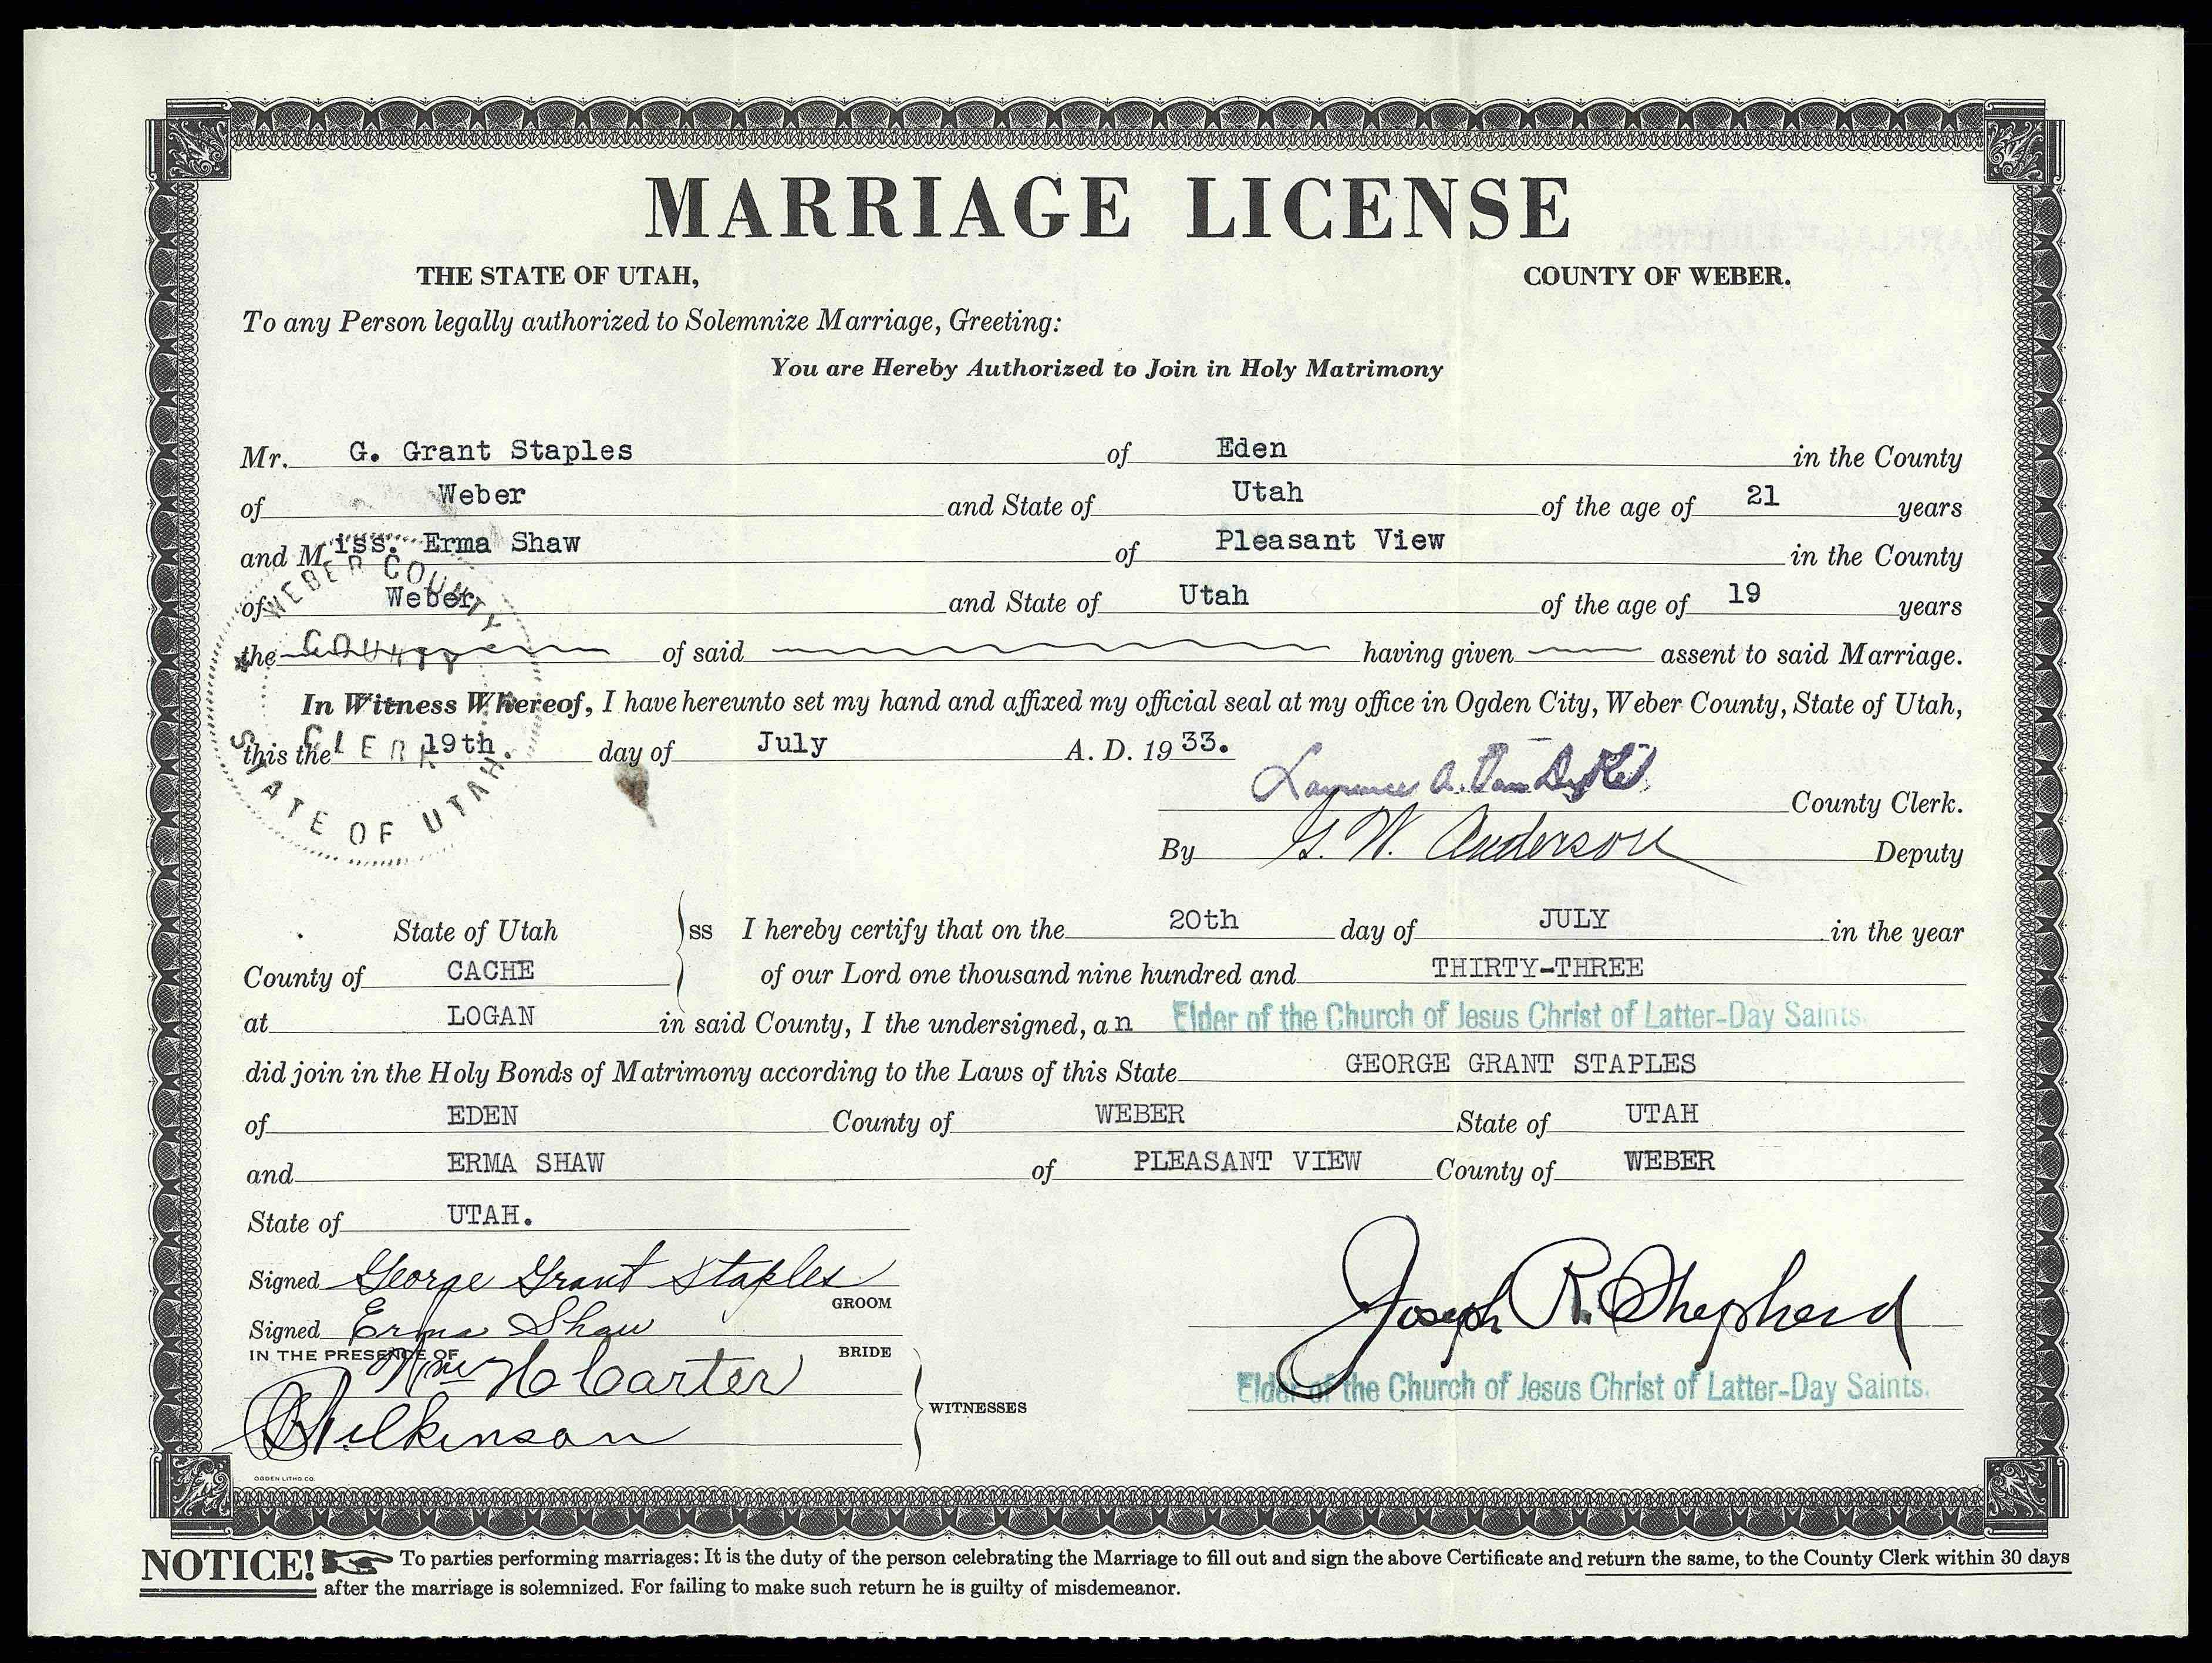 George Grant Staples and Erma Shaw Marriage License